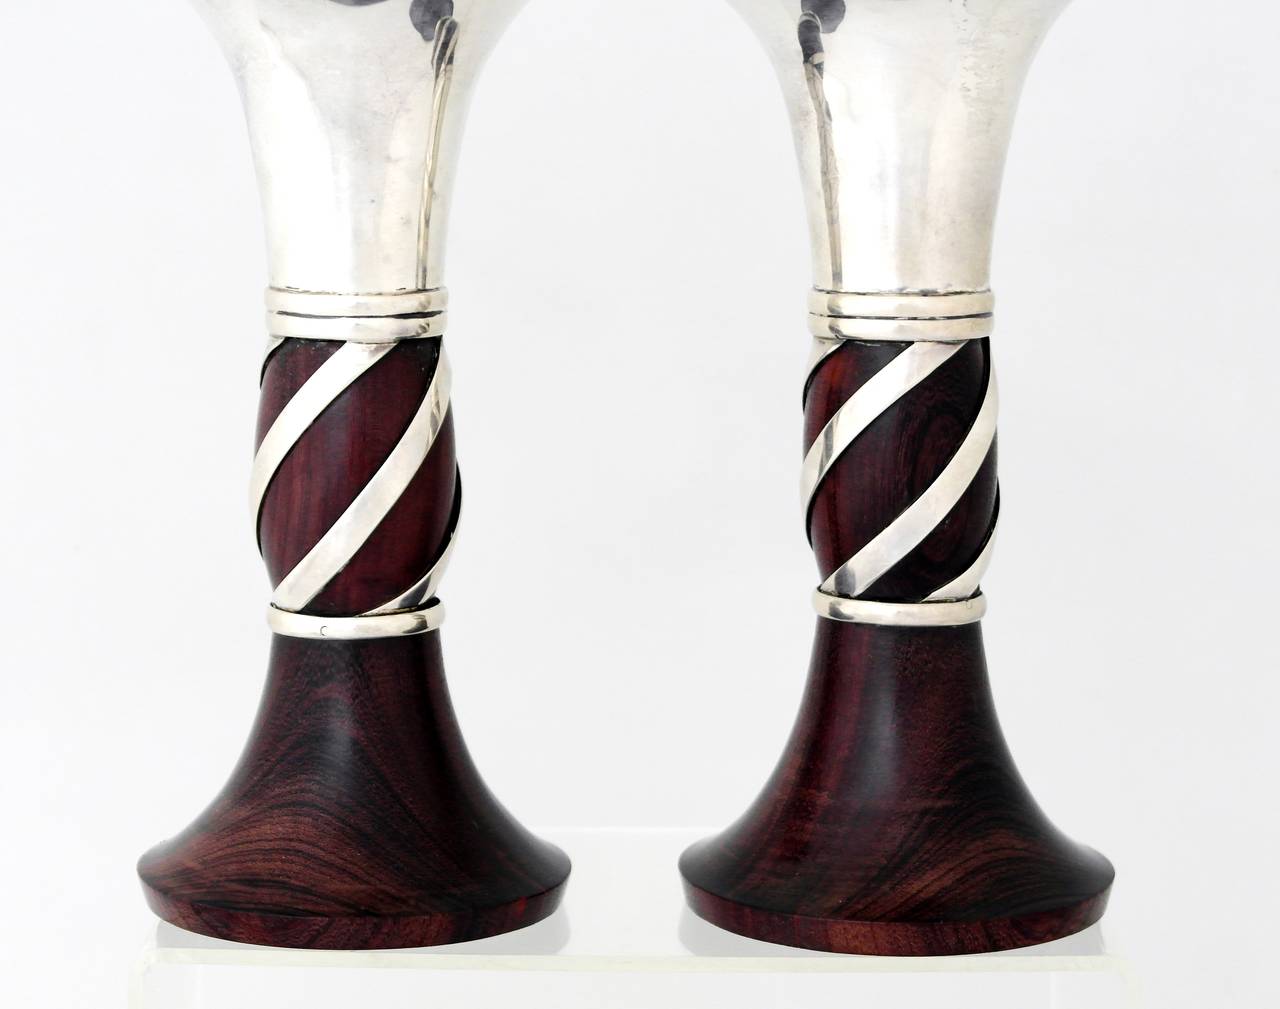 Being offered are a pair of cirda 1950 sterling silver candlesticks by William Spratling of Taxco, Mexico. Horn shaped with wrapped silver wire at the center; rosewood bases. Dimensions: 7 1/8" height; 3 1/2 inch dimater at top. Marked as